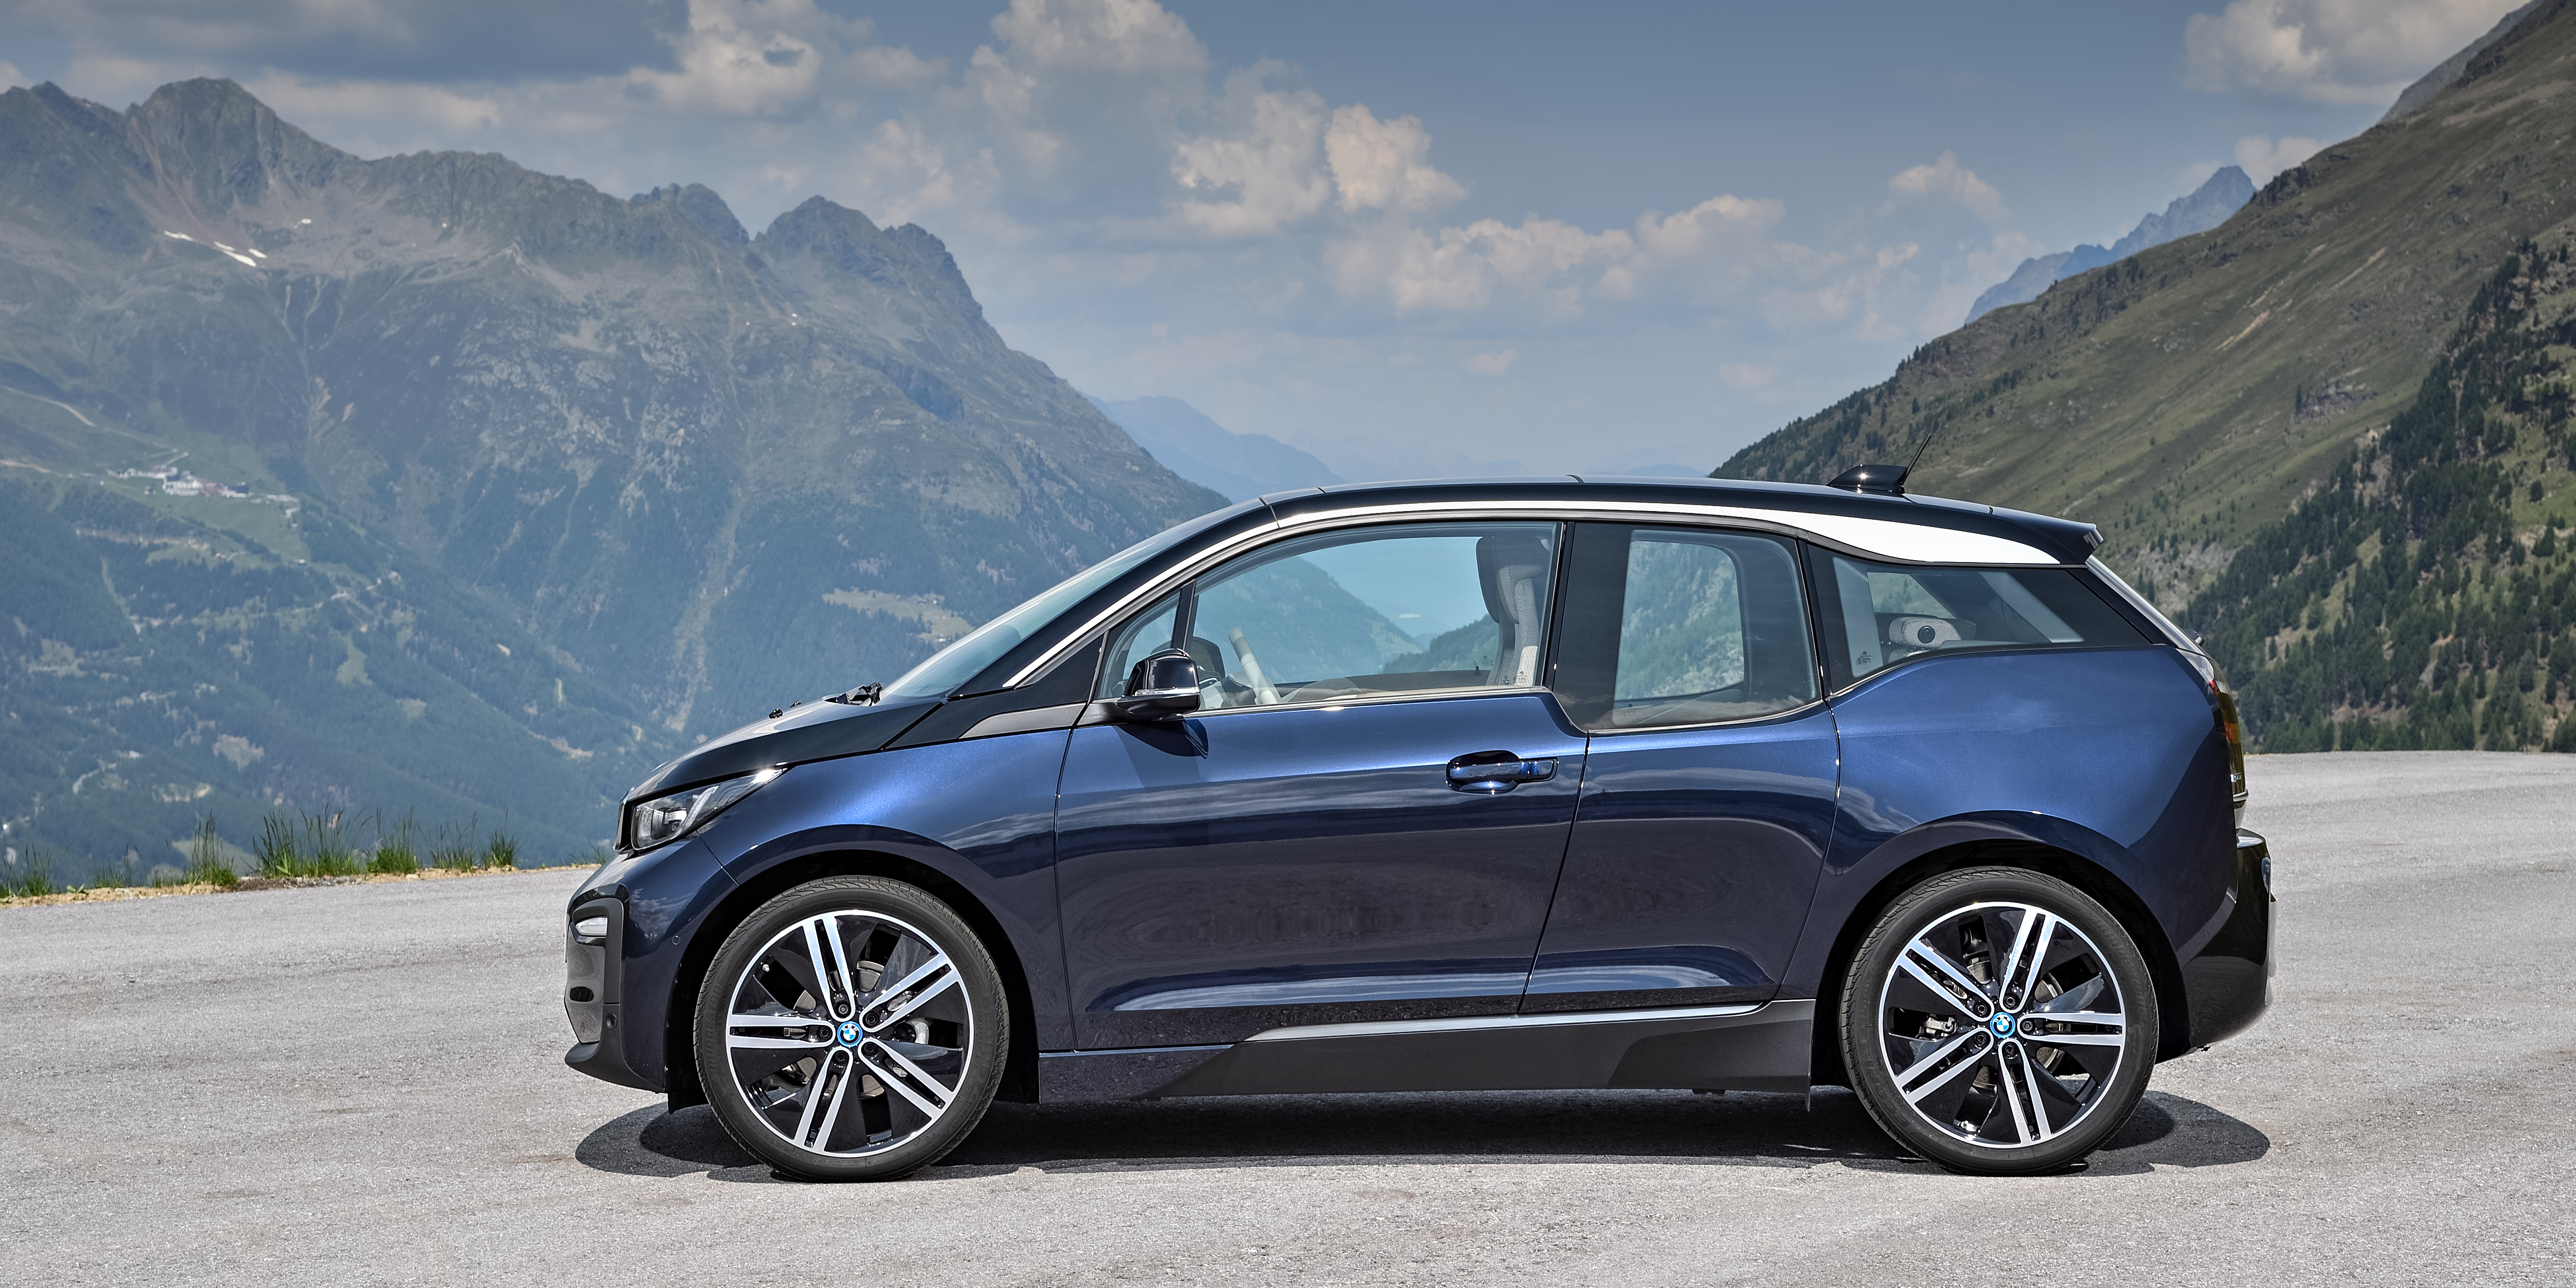 2018 BMW i3 and i3s pricing and specs - Photos (1 of 27)